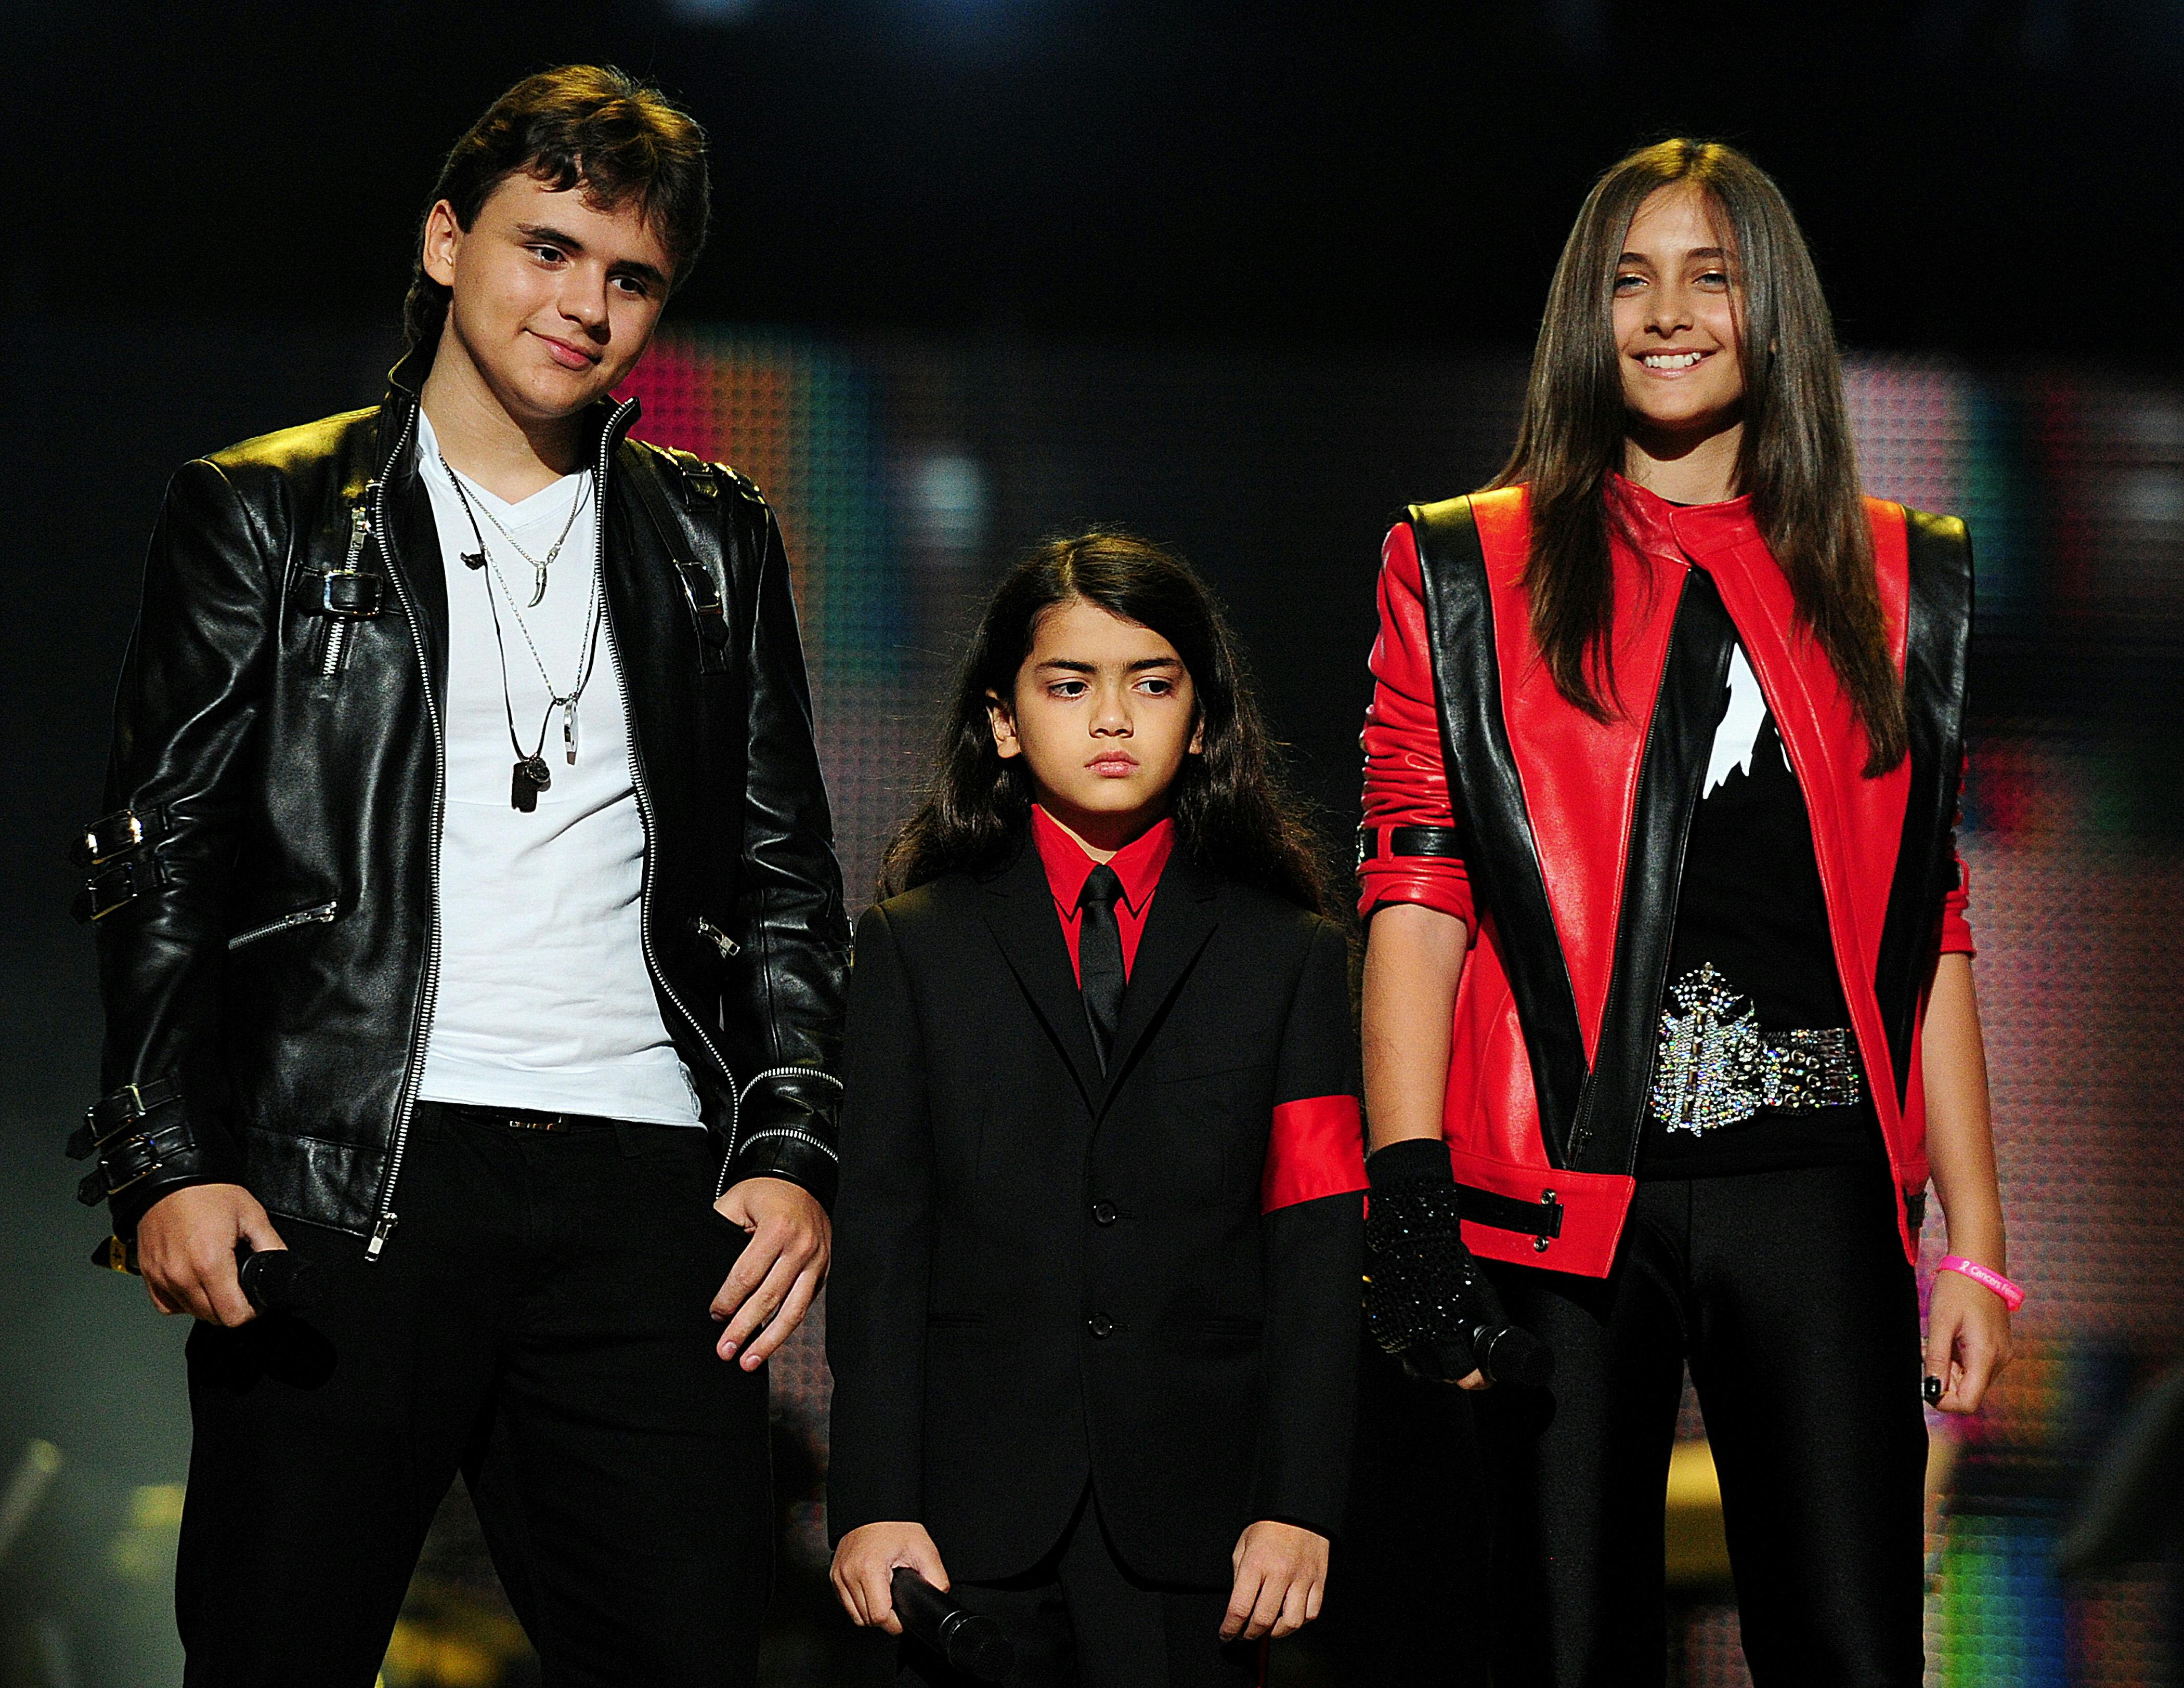 Michael Jackson's children, Prince Jackson (L), Blanket Jackson (C) and Paris Jackson (R) speak on stage during the 'Michael Forever' concert in memory of the late Michael Jackson at The Millenium Stadium in Cardiff, Wales on October 8, 2011. AFP PHOTO / LEON NEAL